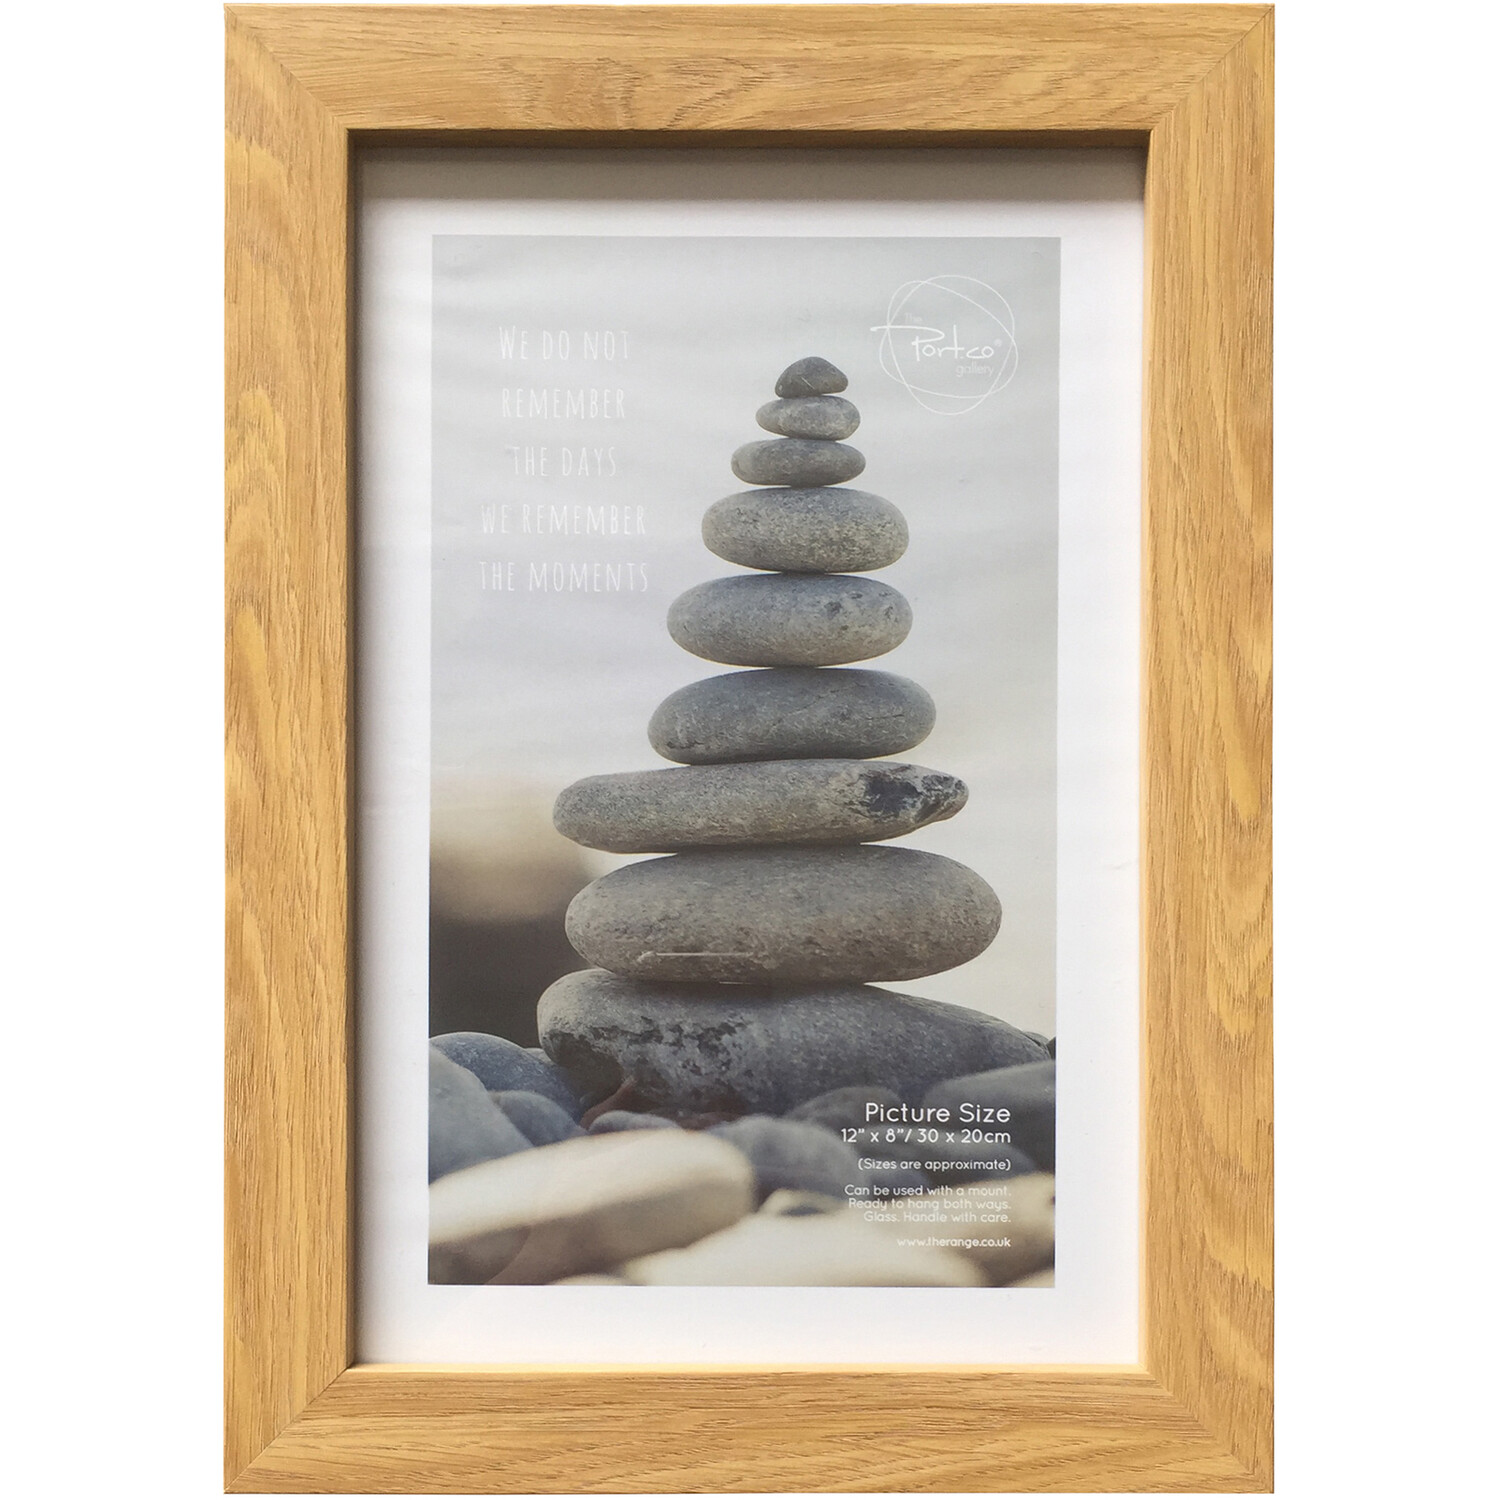 The Port. Co Gallery Wood Effect Somerset Photo Frame 12 x 8 inch Image